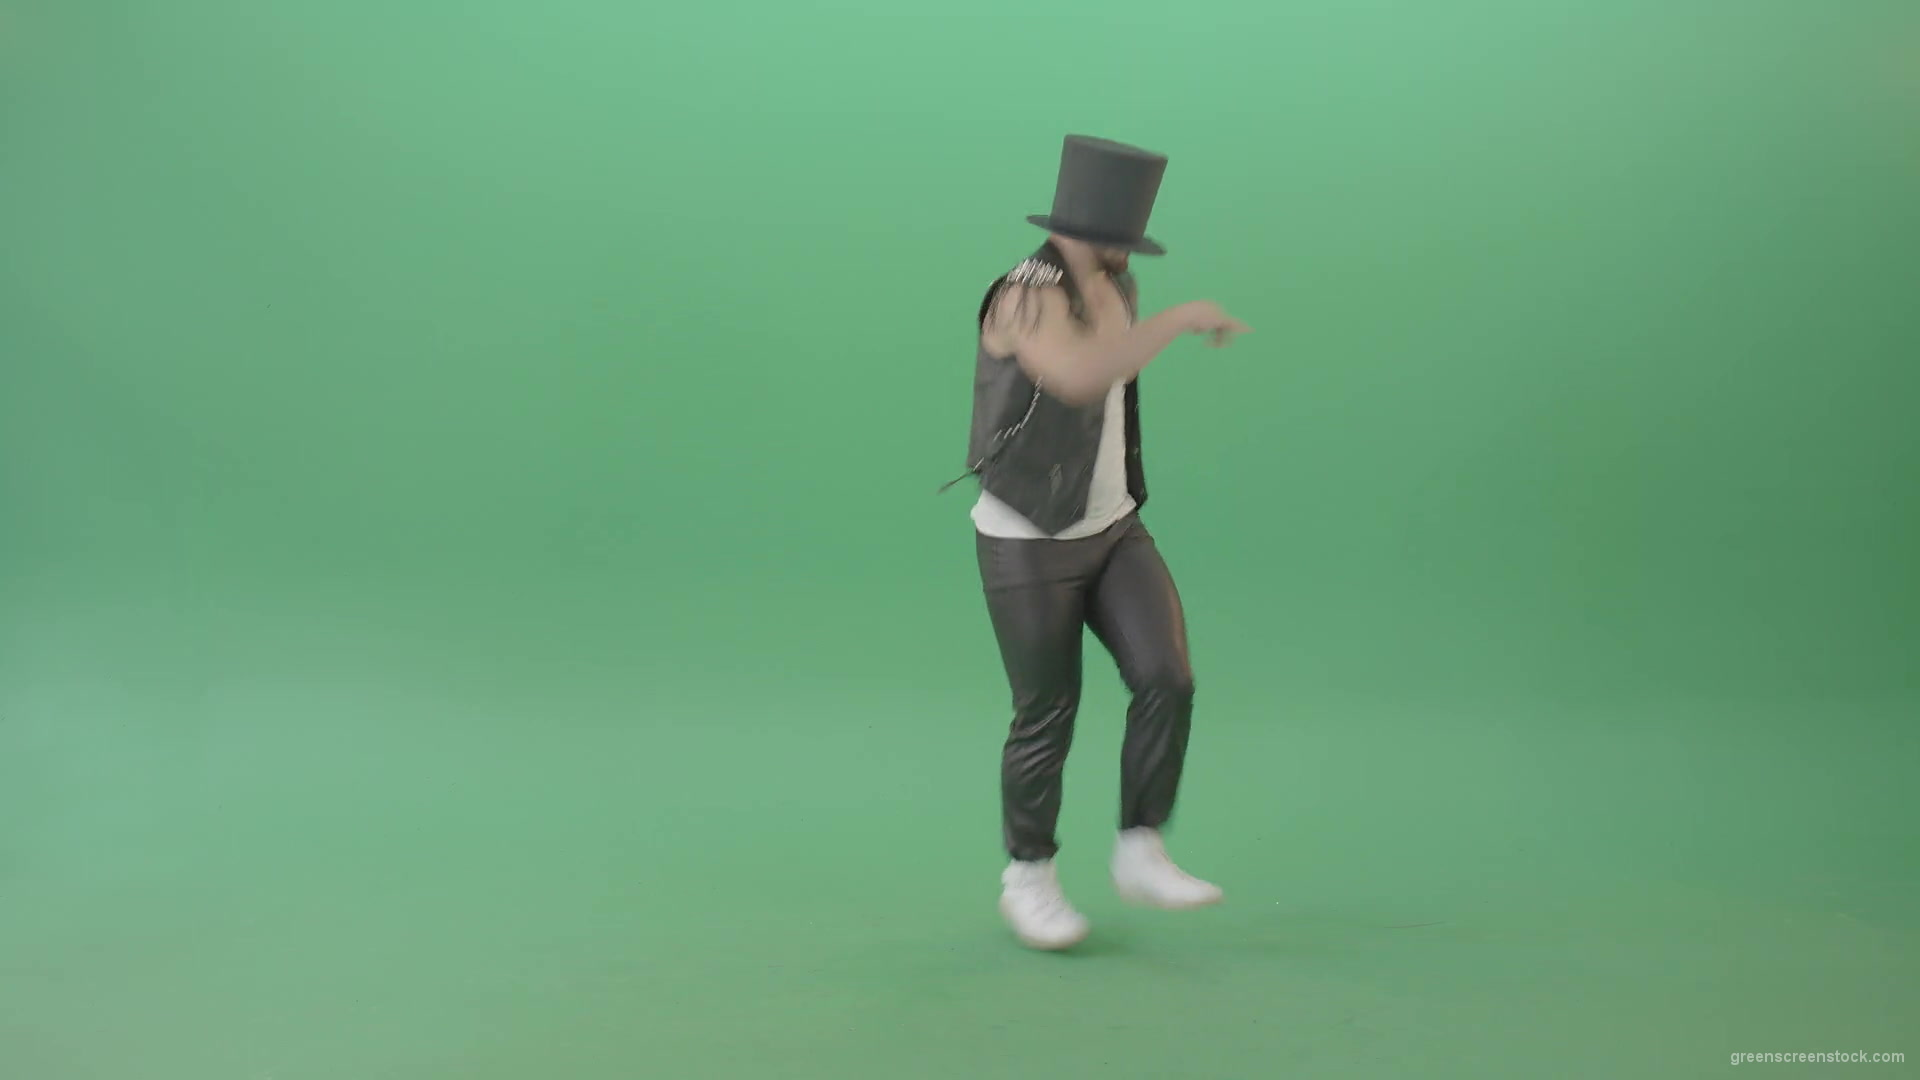 Man-in-black-Busines-Cylinder-Hat-dancing-and-jumping-in-Shuffle-dance-isolated-on-Green-Screen-4K-Video-Footage-1920_007 Green Screen Stock